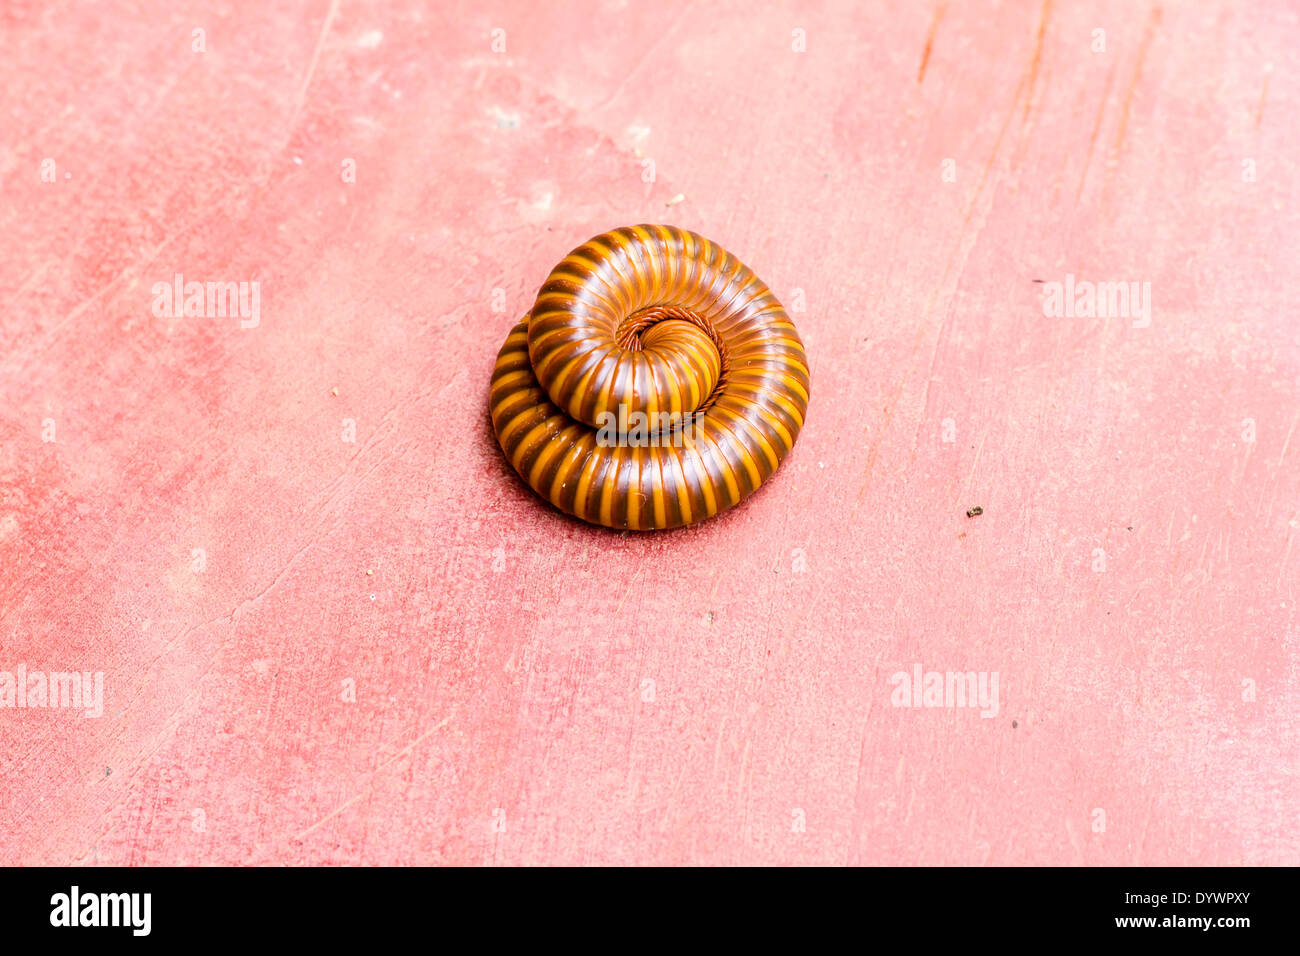 A Millipede on the red concrete floor Stock Photo